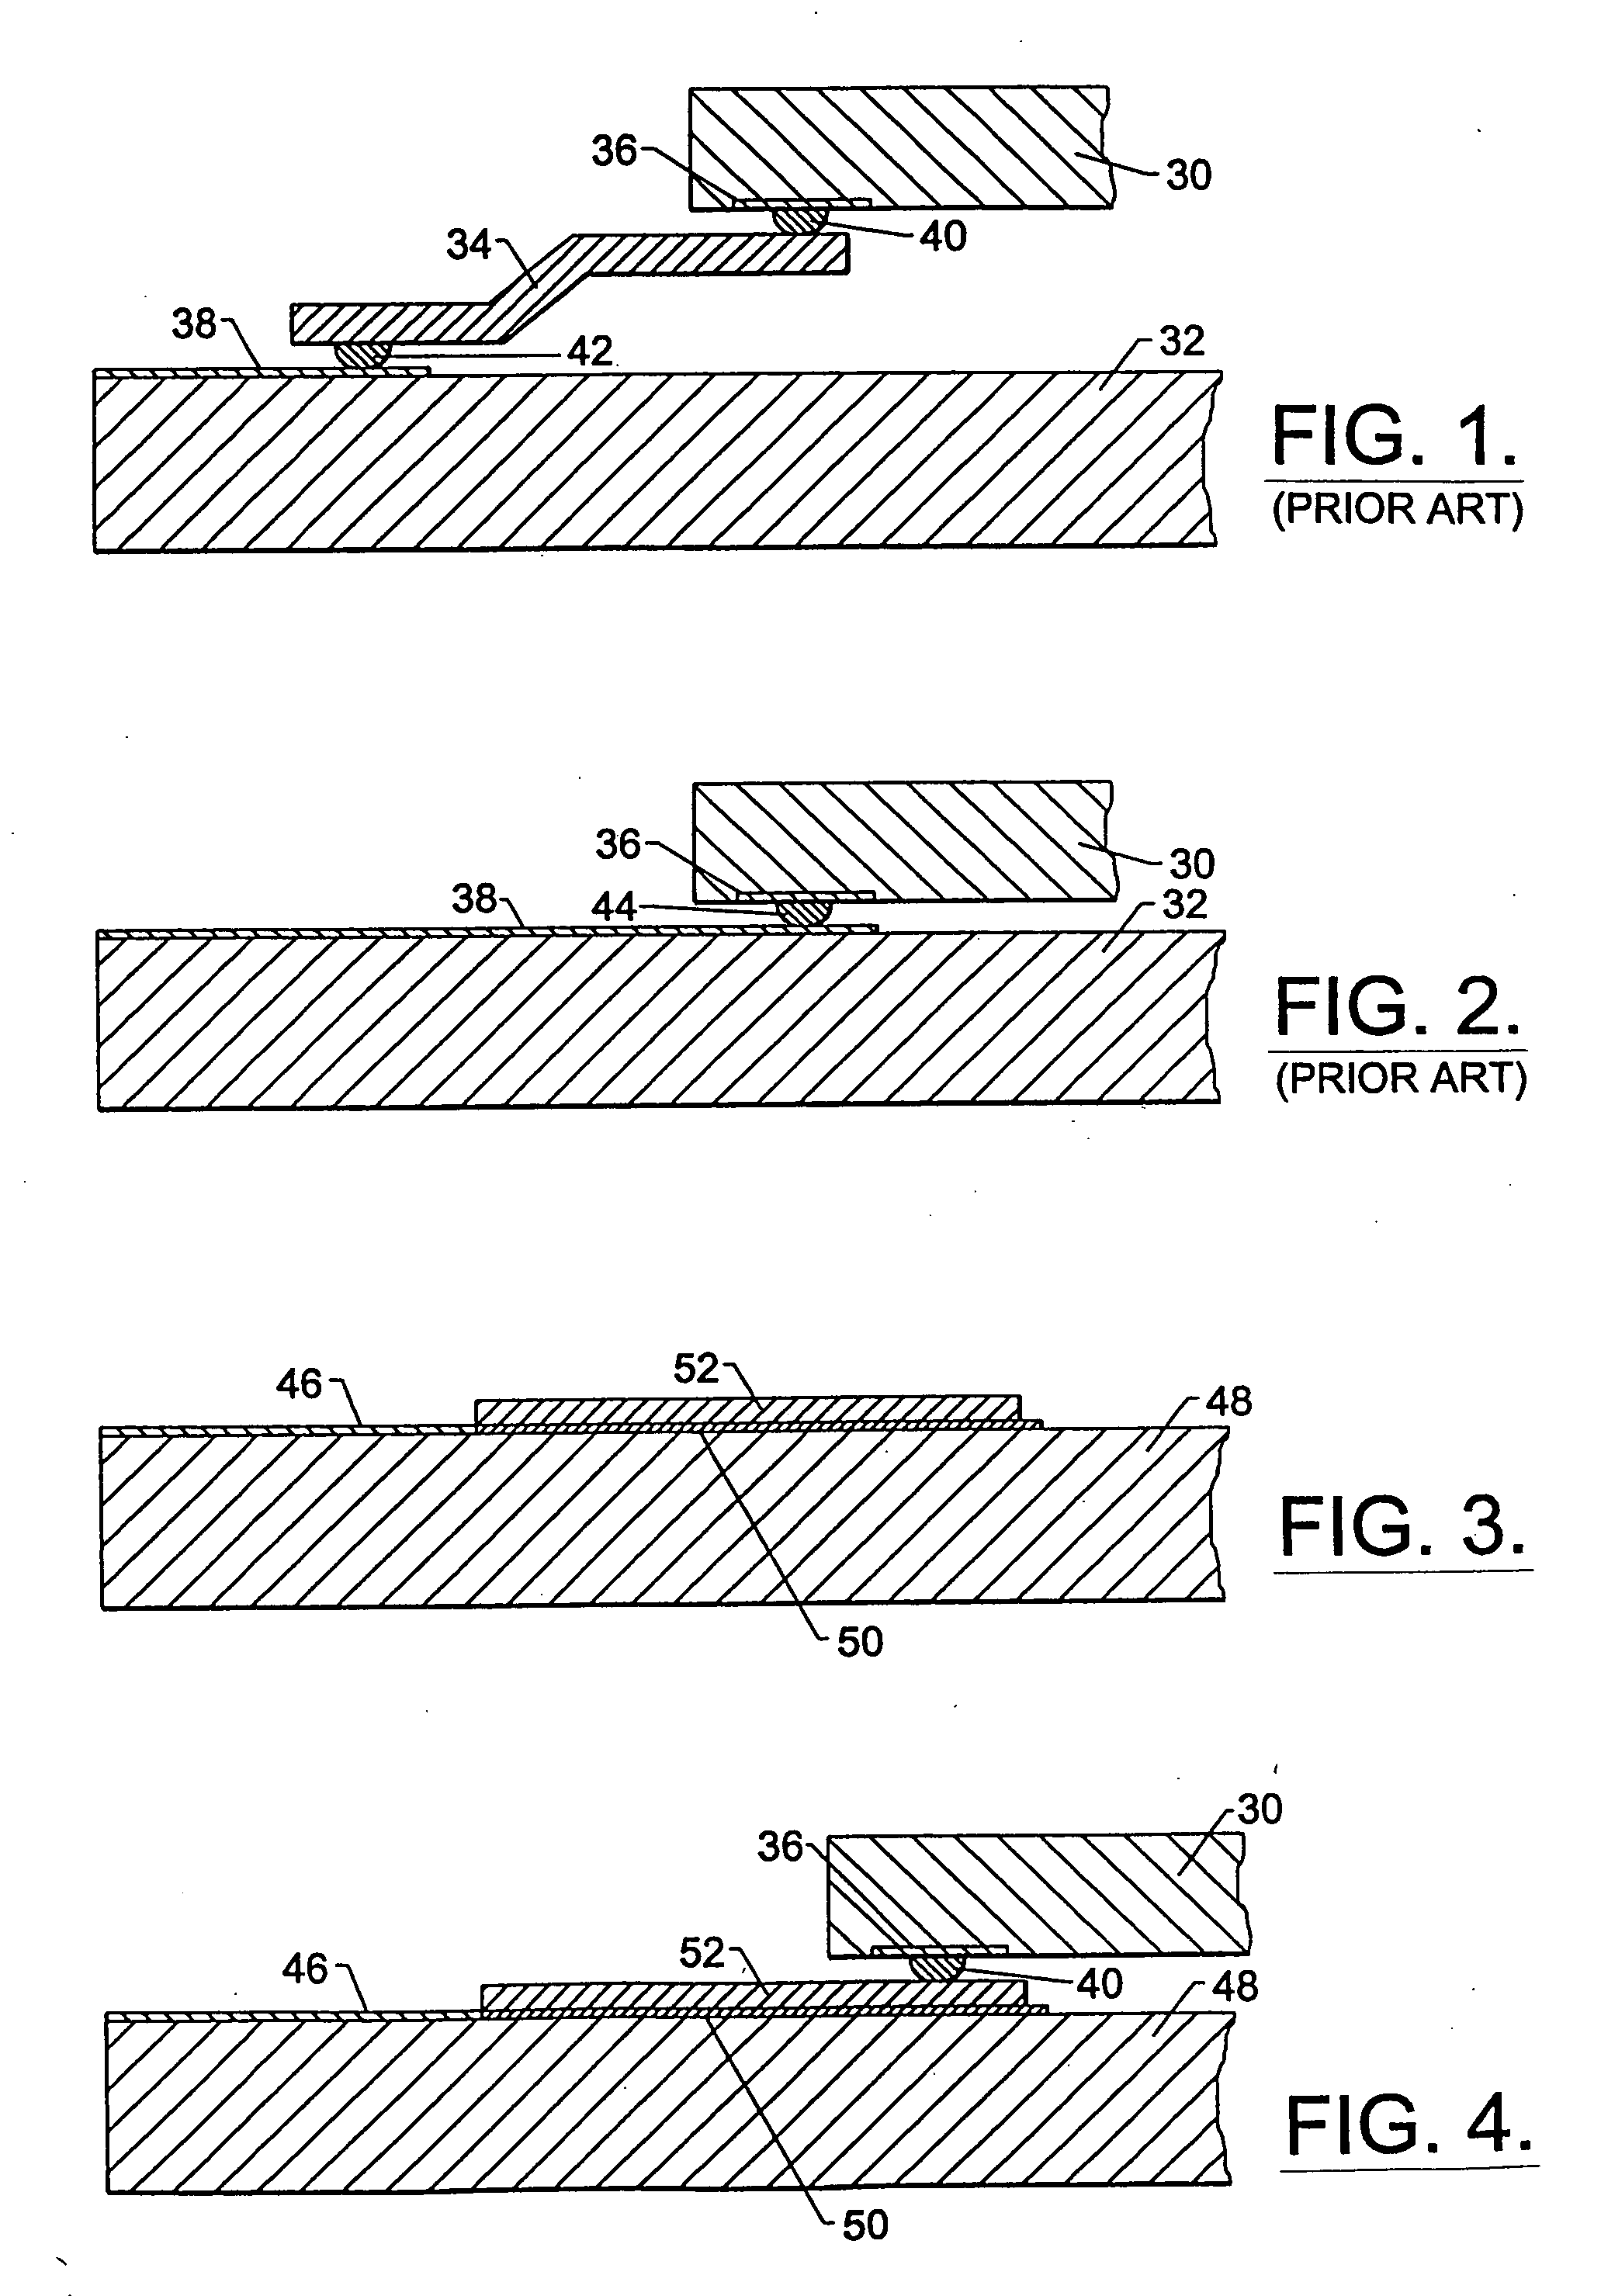 Microbeam assembly and associated method for integrated circuit interconnection to substrates